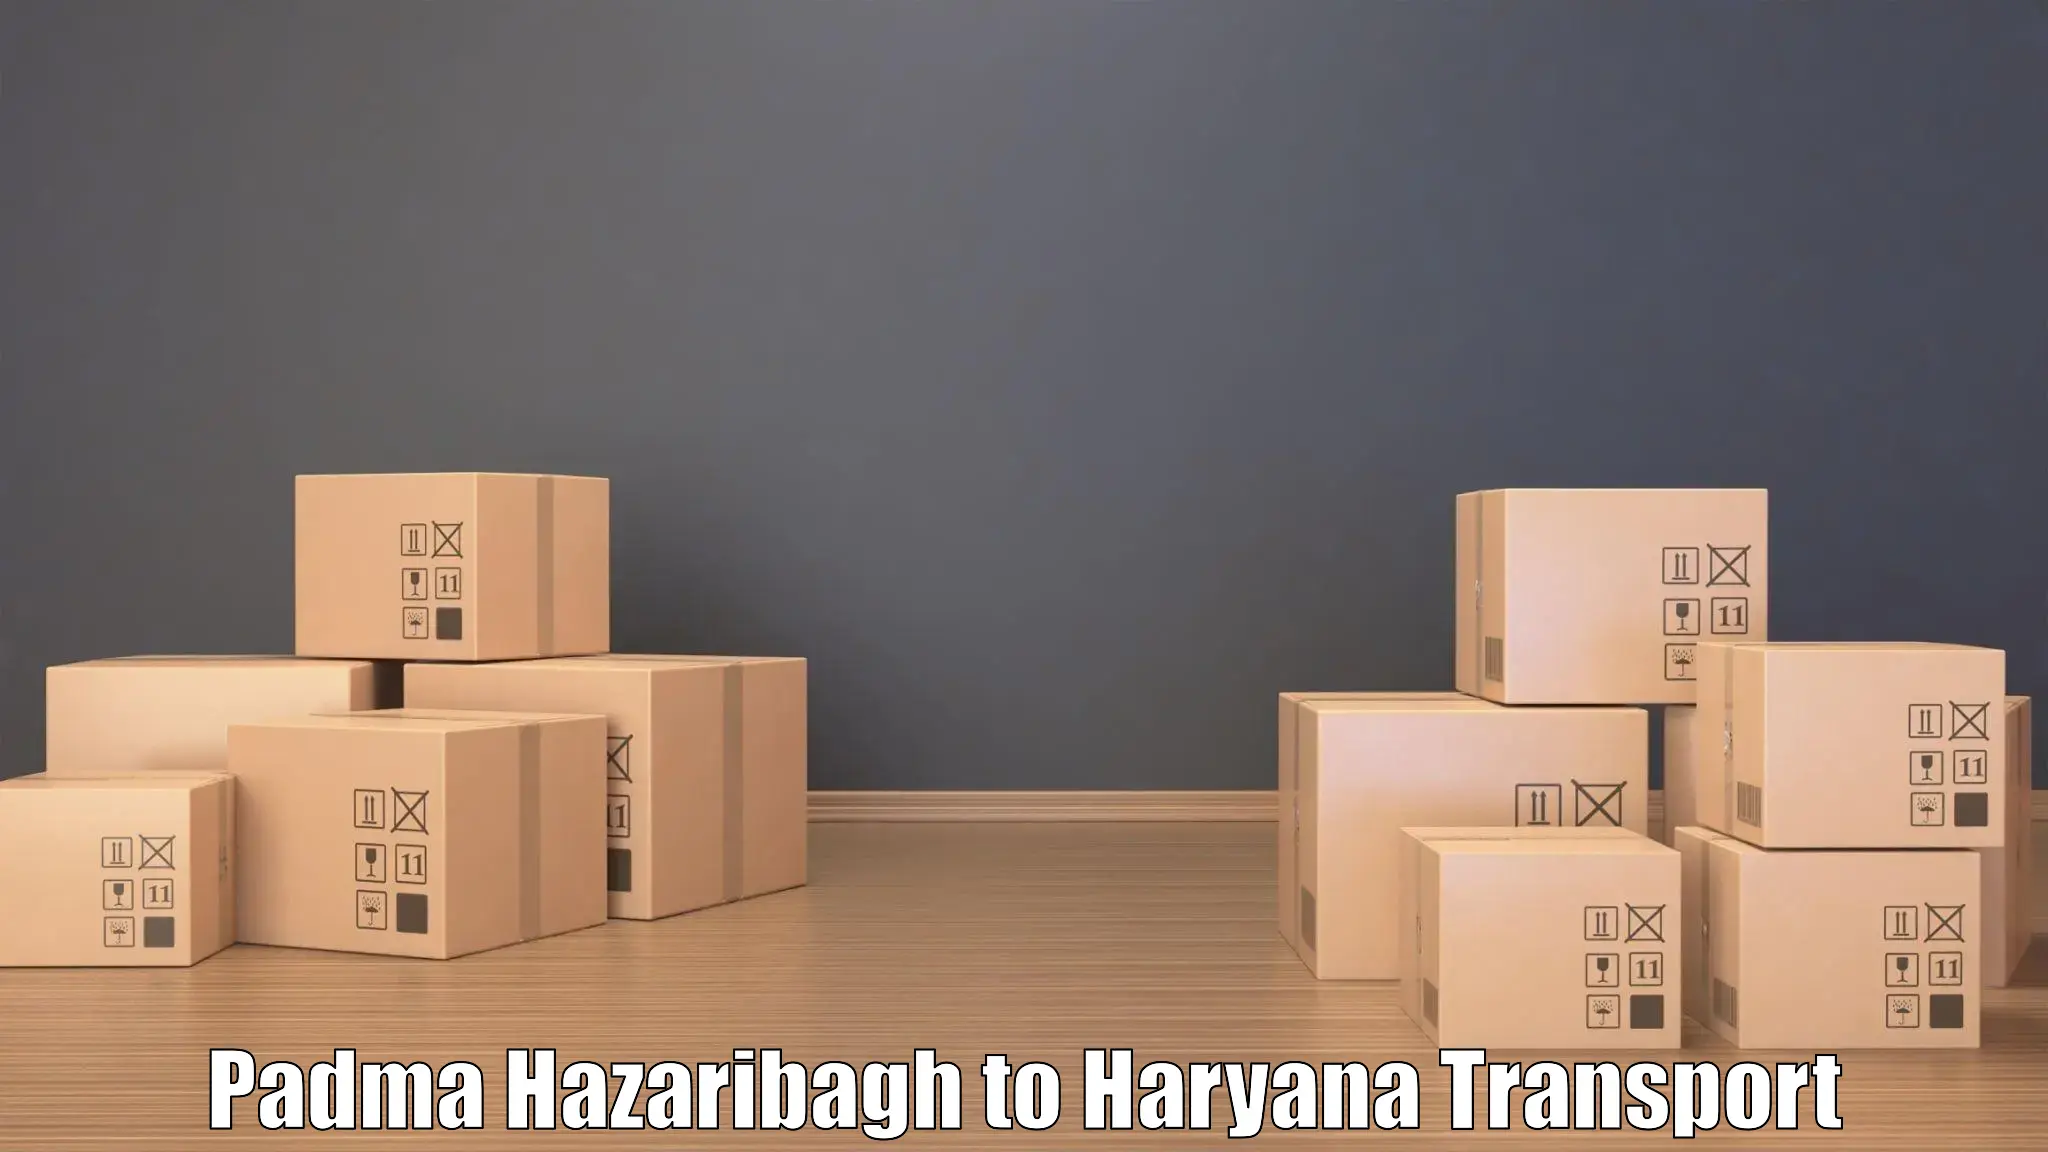 Commercial transport service in Padma Hazaribagh to Chirya